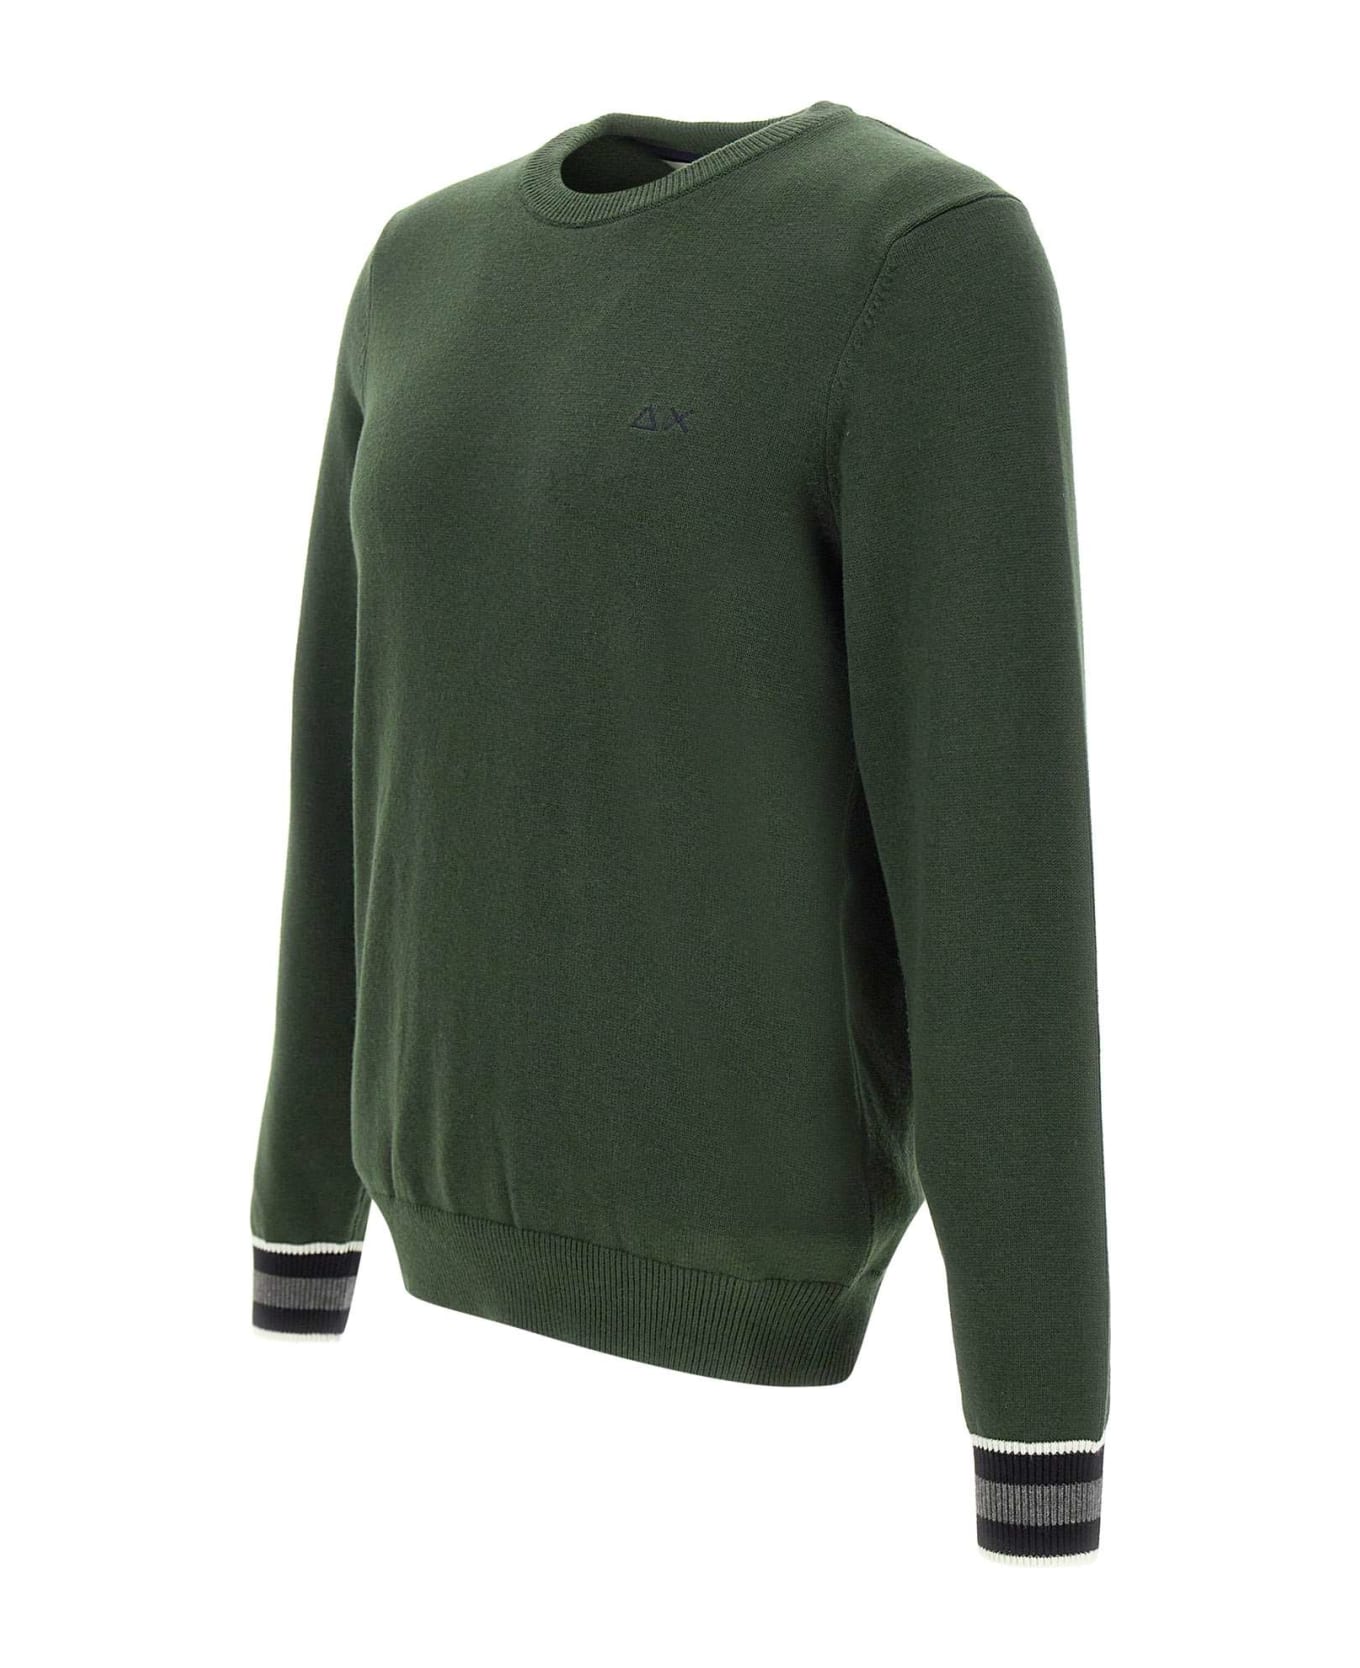 Sun 68 Wool And Cotton Sweater Sweater - MILITARE